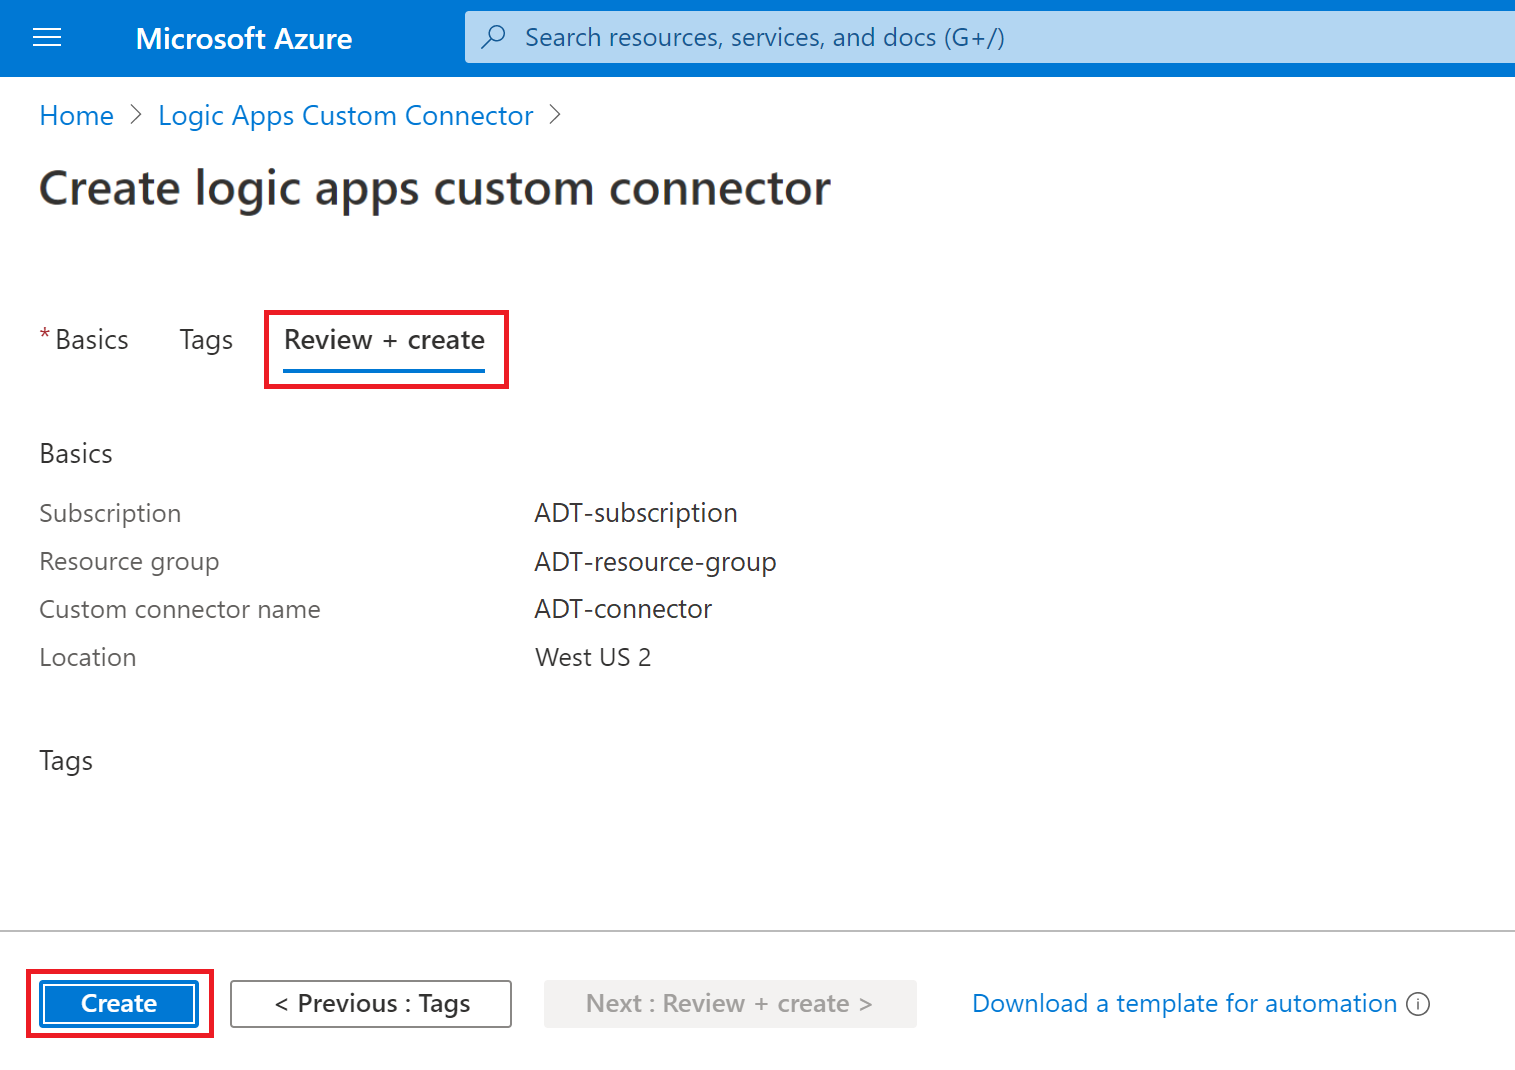 Screenshot of the 'Review + create' tab of the 'Review Logic Apps Custom Connector' page in the Azure portal.